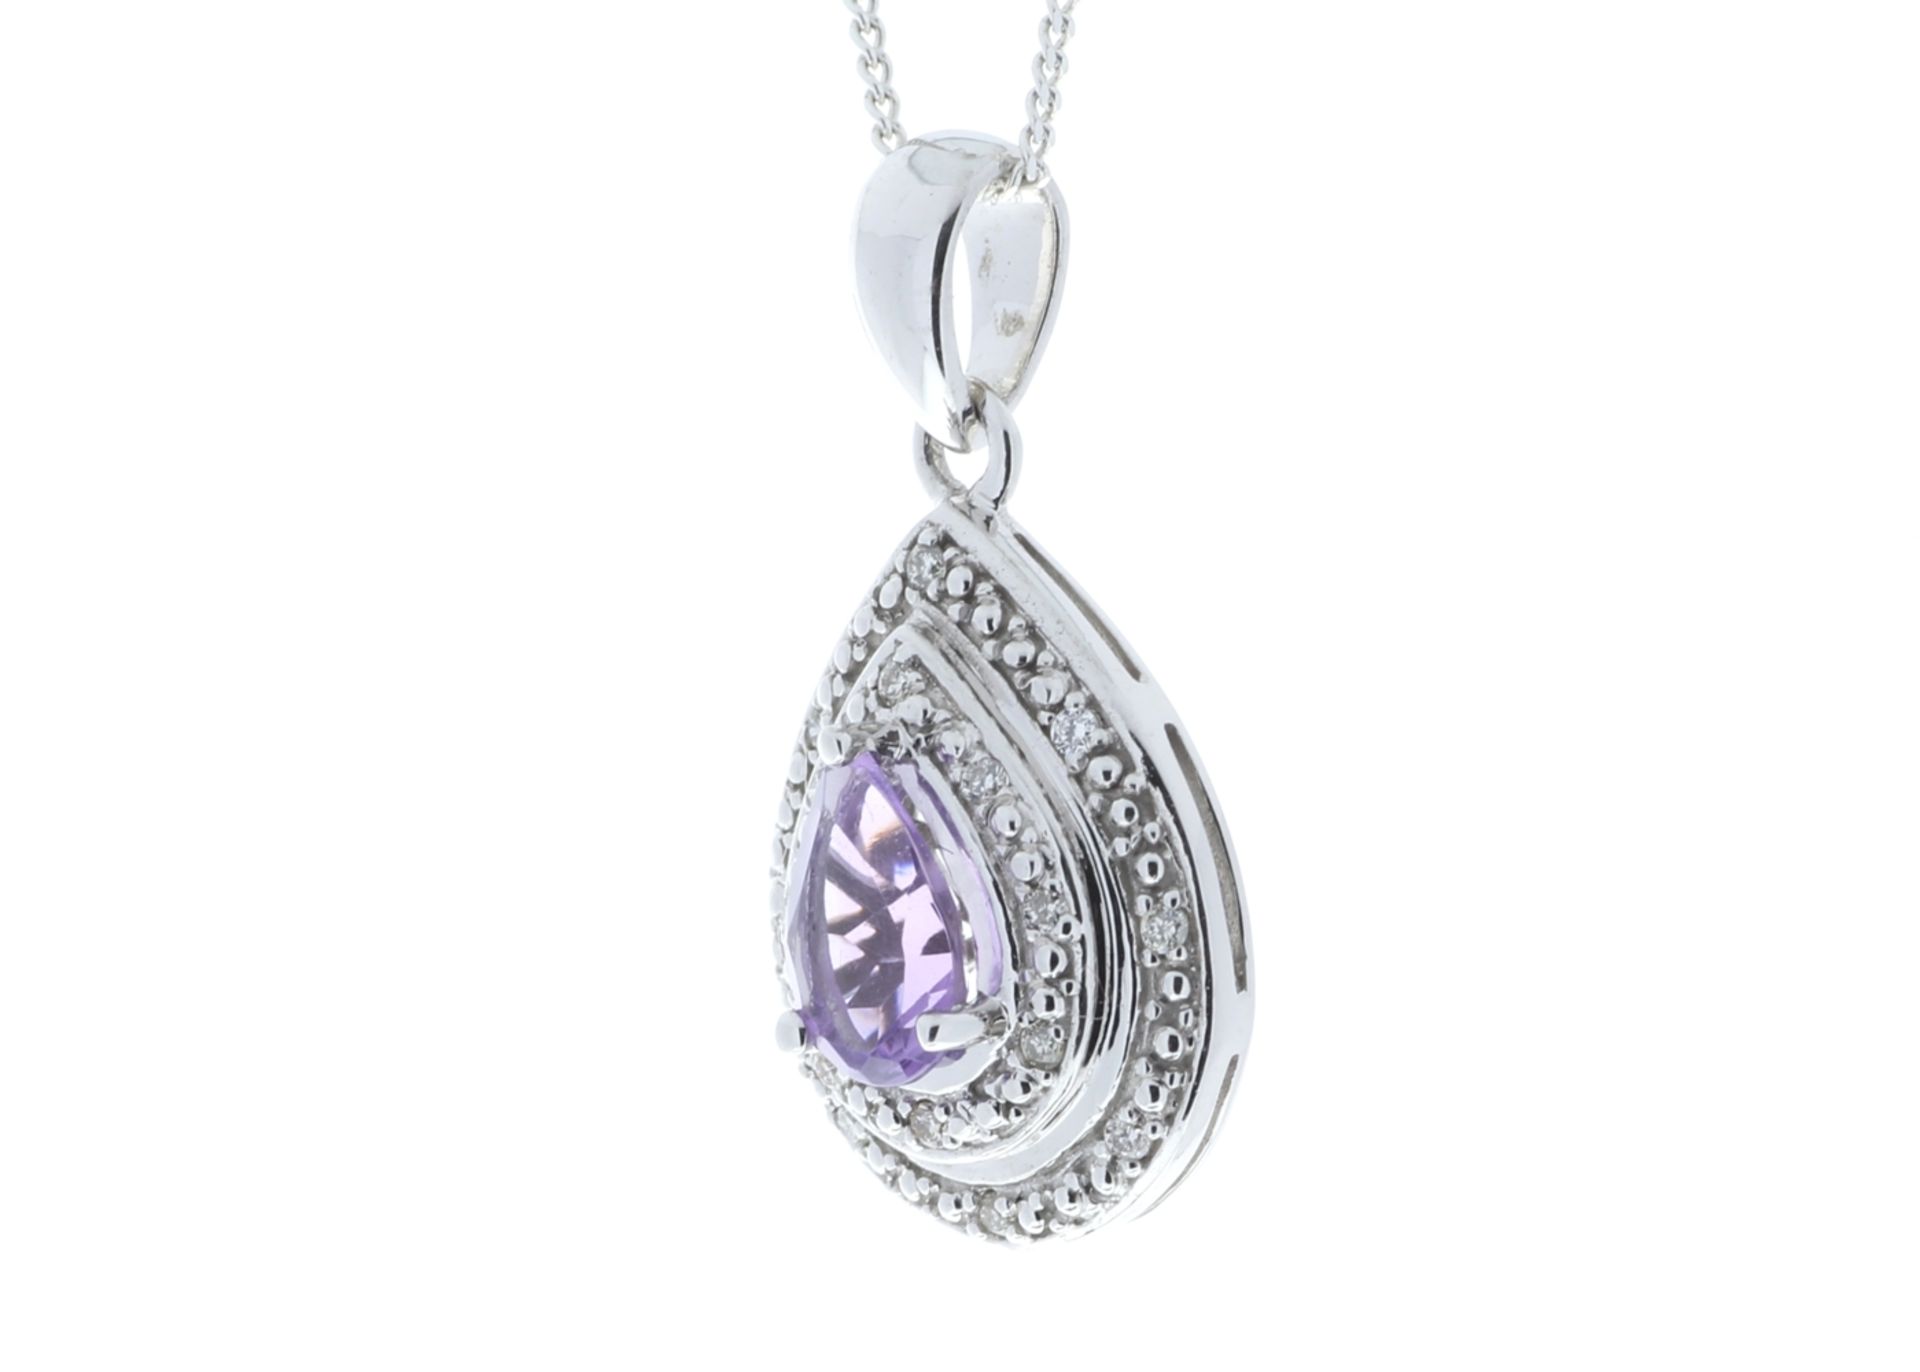 9ct White Gold Amethyst Pear Shaped Cluster Diamond Pendant 0.08 Carats - Valued by GIE £1,595. - Image 4 of 5